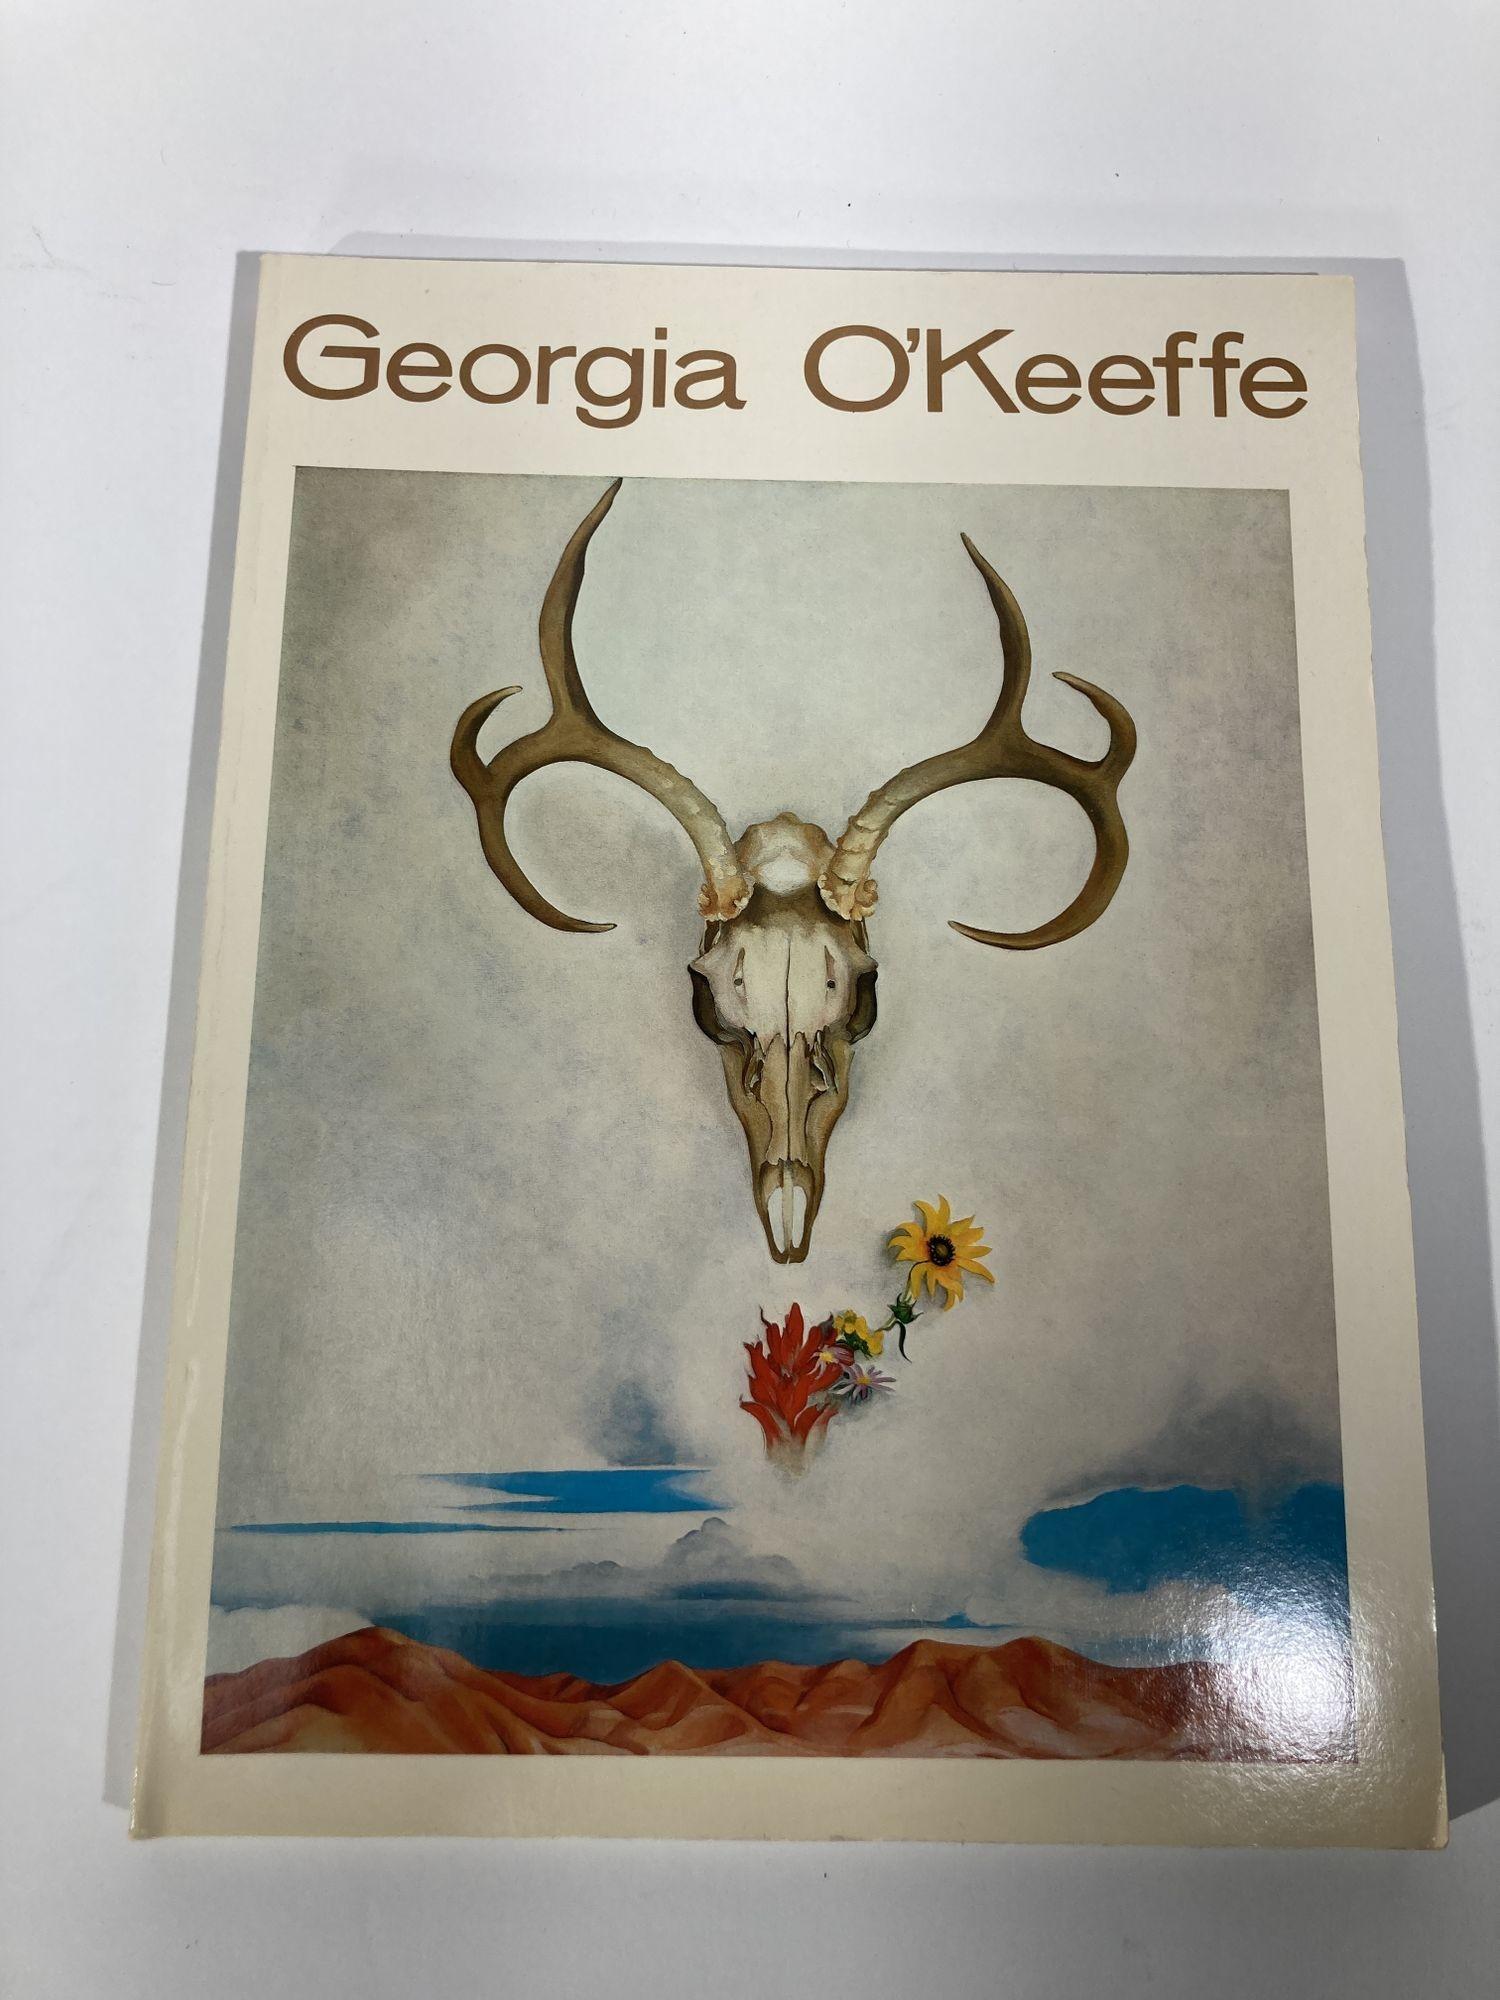 Georgia O'Keeffe coffee table book.
 A studio art book by The Viking Press New York with over one hundred color reproductions of the preeminent American modernist's paintings are accompanied by her own recollections of and comments on the impulses